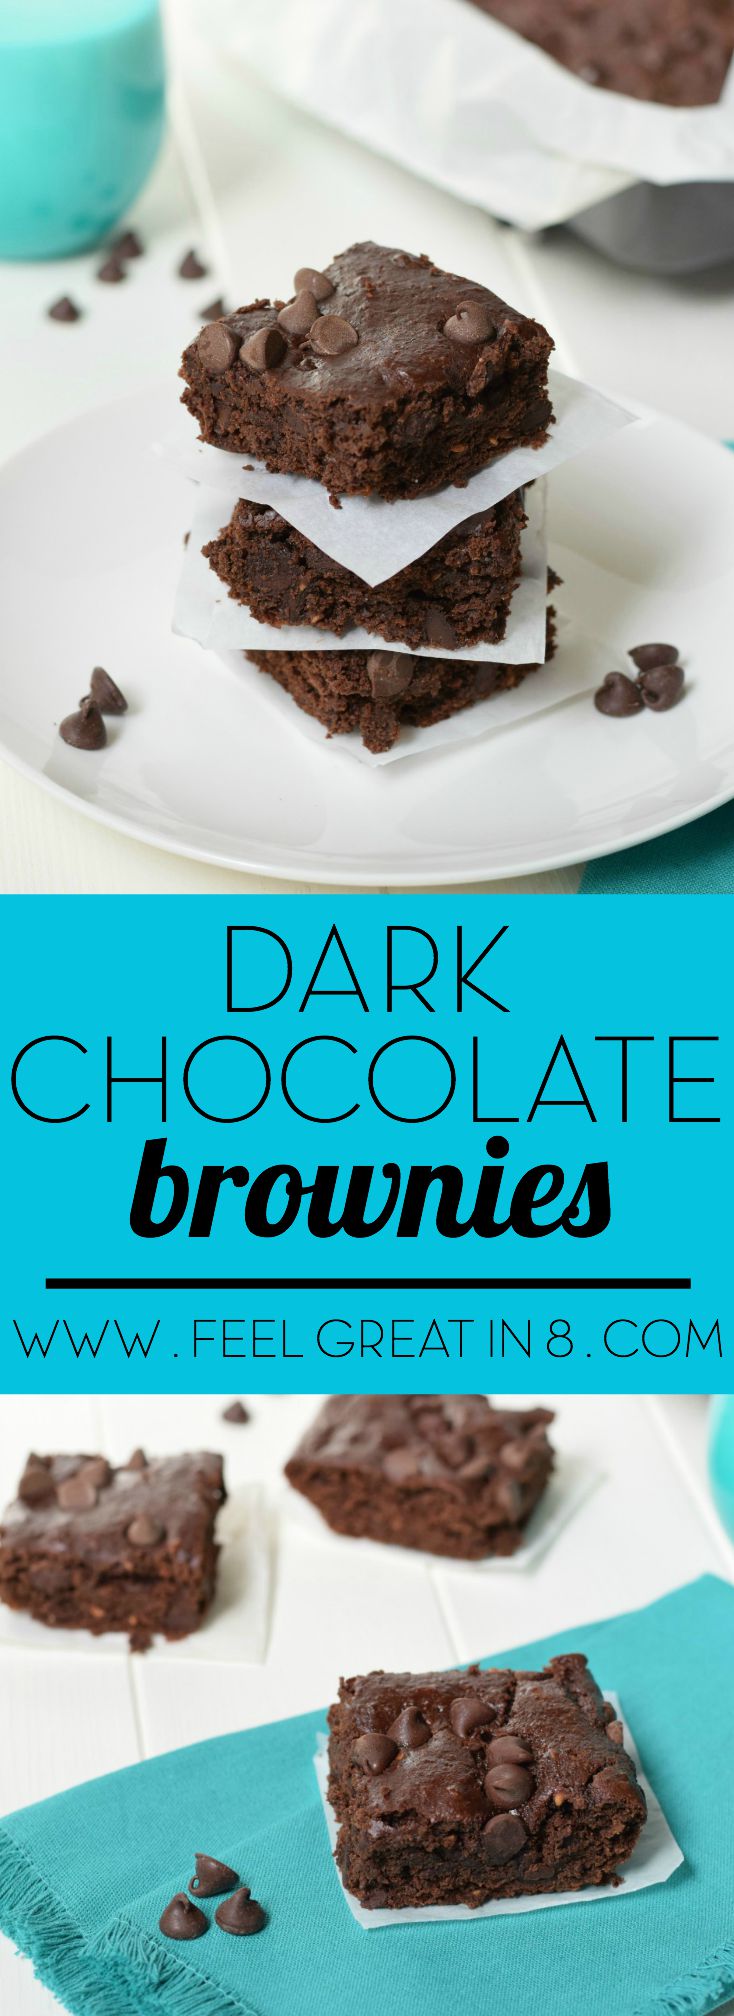 These Dark Chocolate Brownies are fudgy and delicious, but they are also a guilt-free, clean eating dessert! No flour, oil, or refined sugar, and no weird beans or veggies! | Feel Great in 8